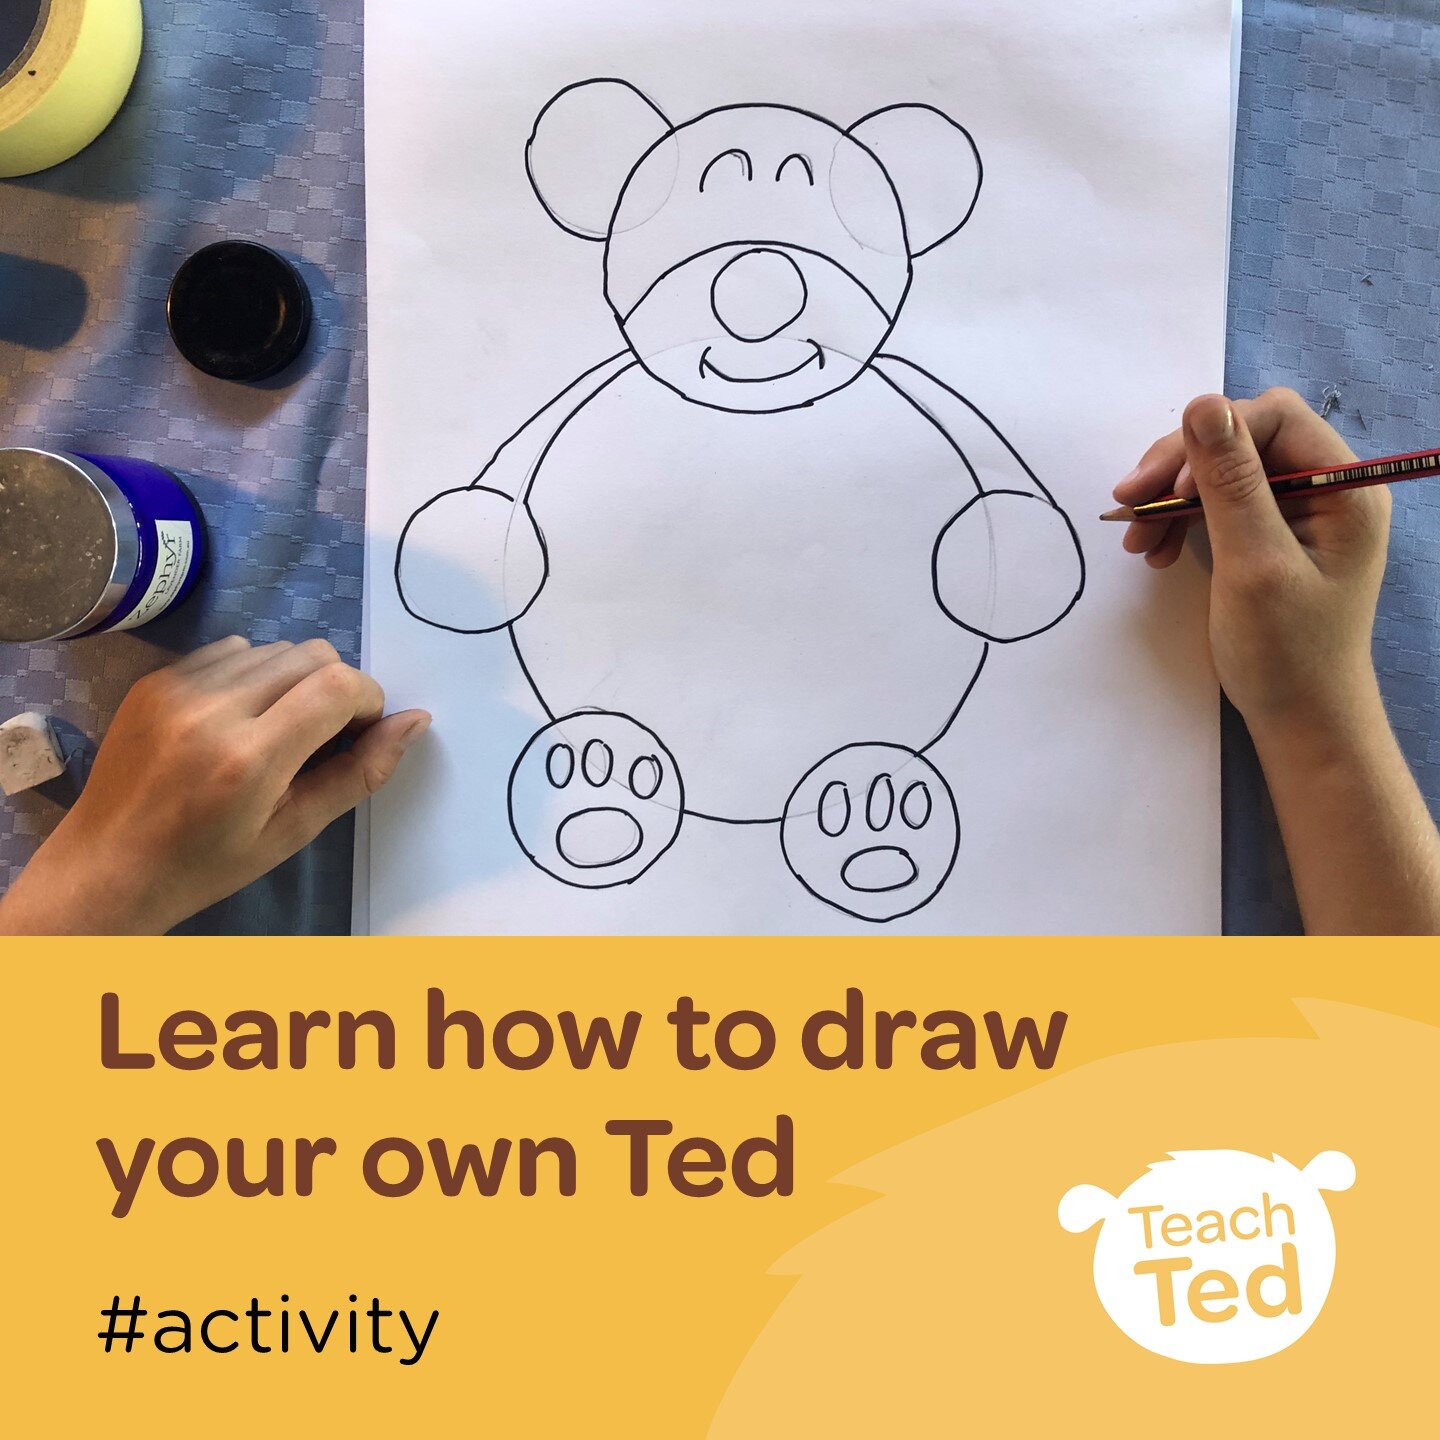 Learn how to draw your own Ted